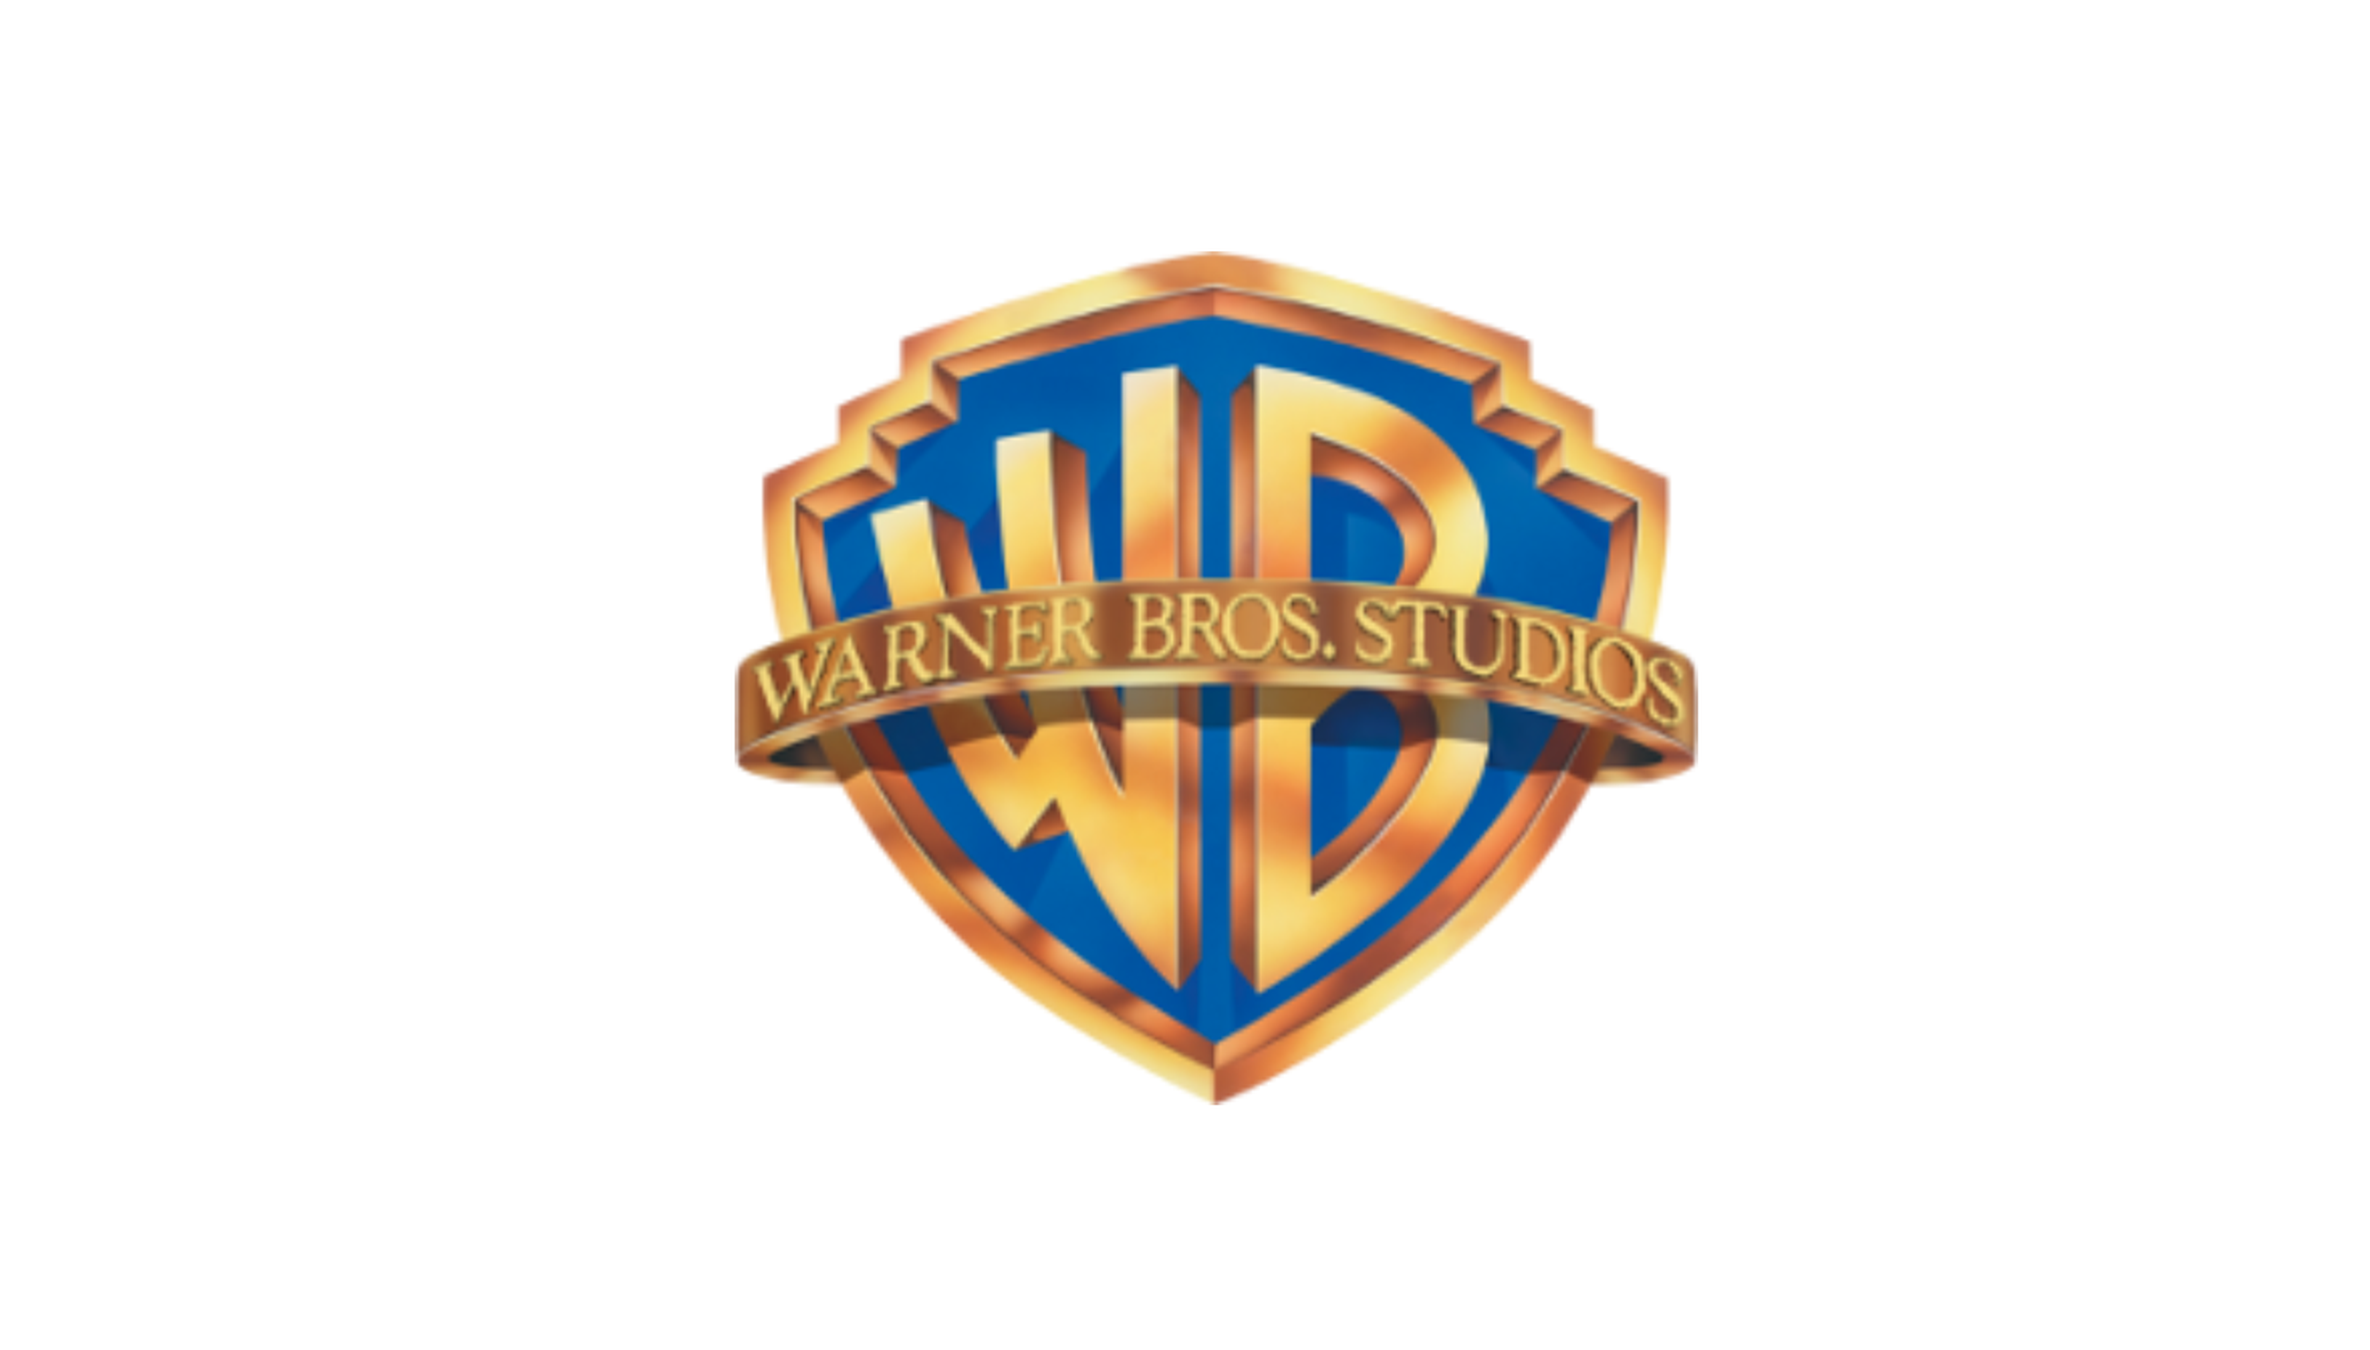 Now Casting Play a Lead Role in a Warner Bros. LiveAction Feature